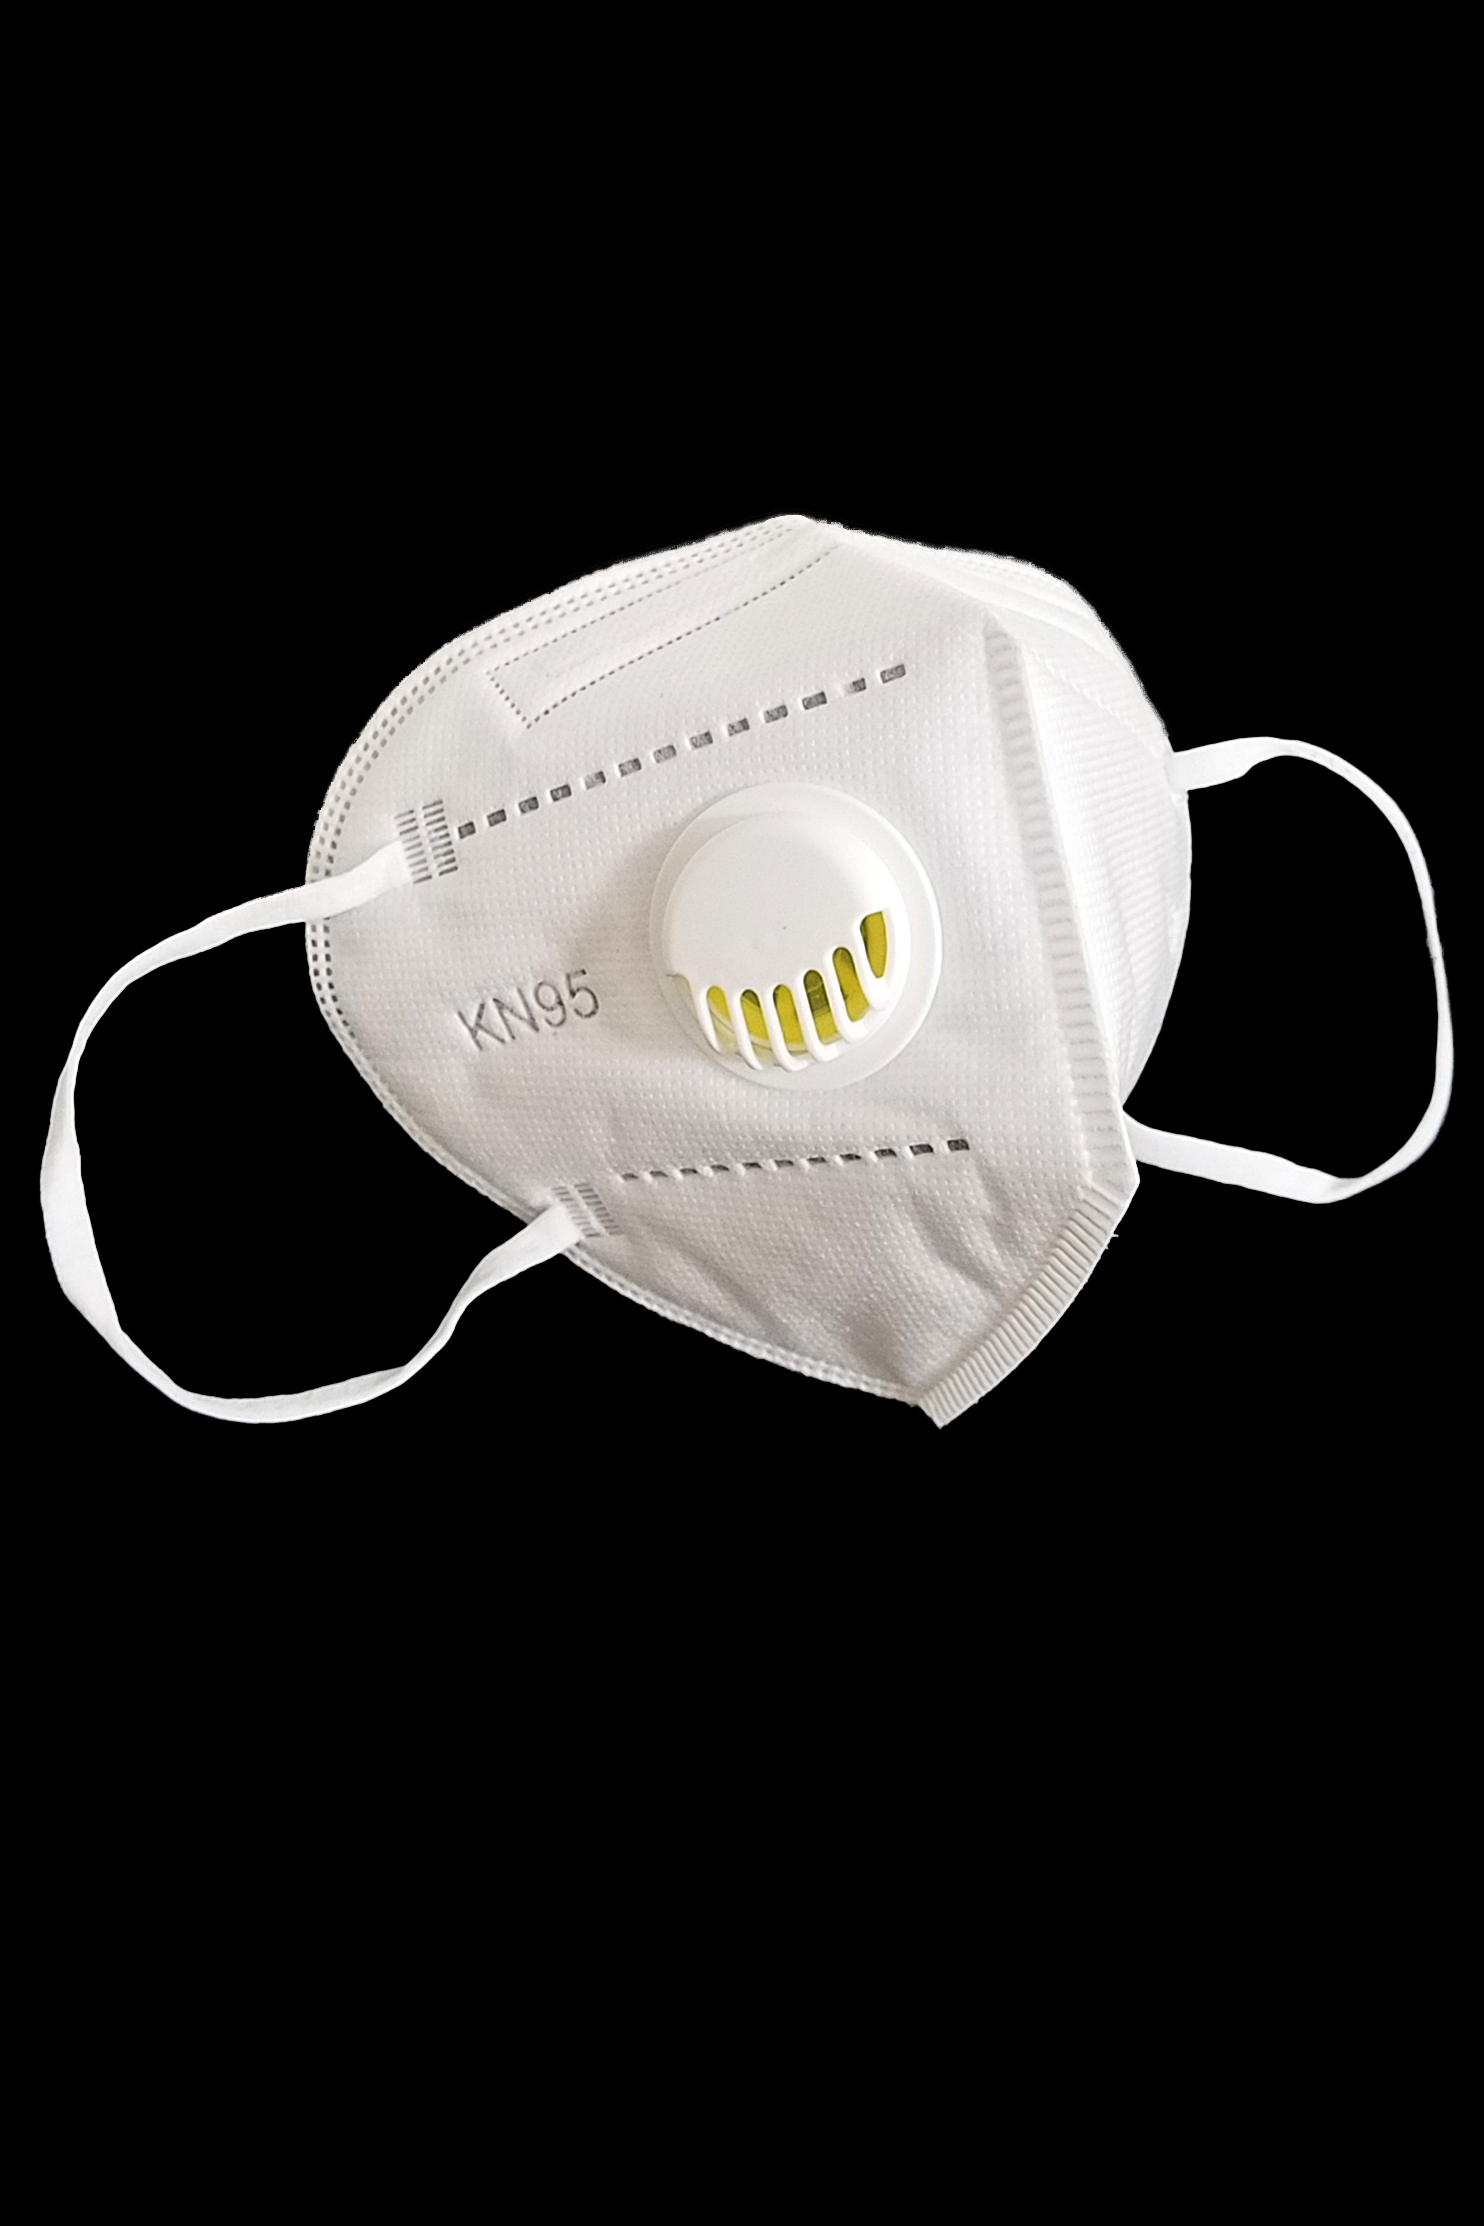 Wholesale White KN95 Face Mask with Air Valve - Individually Wrapped